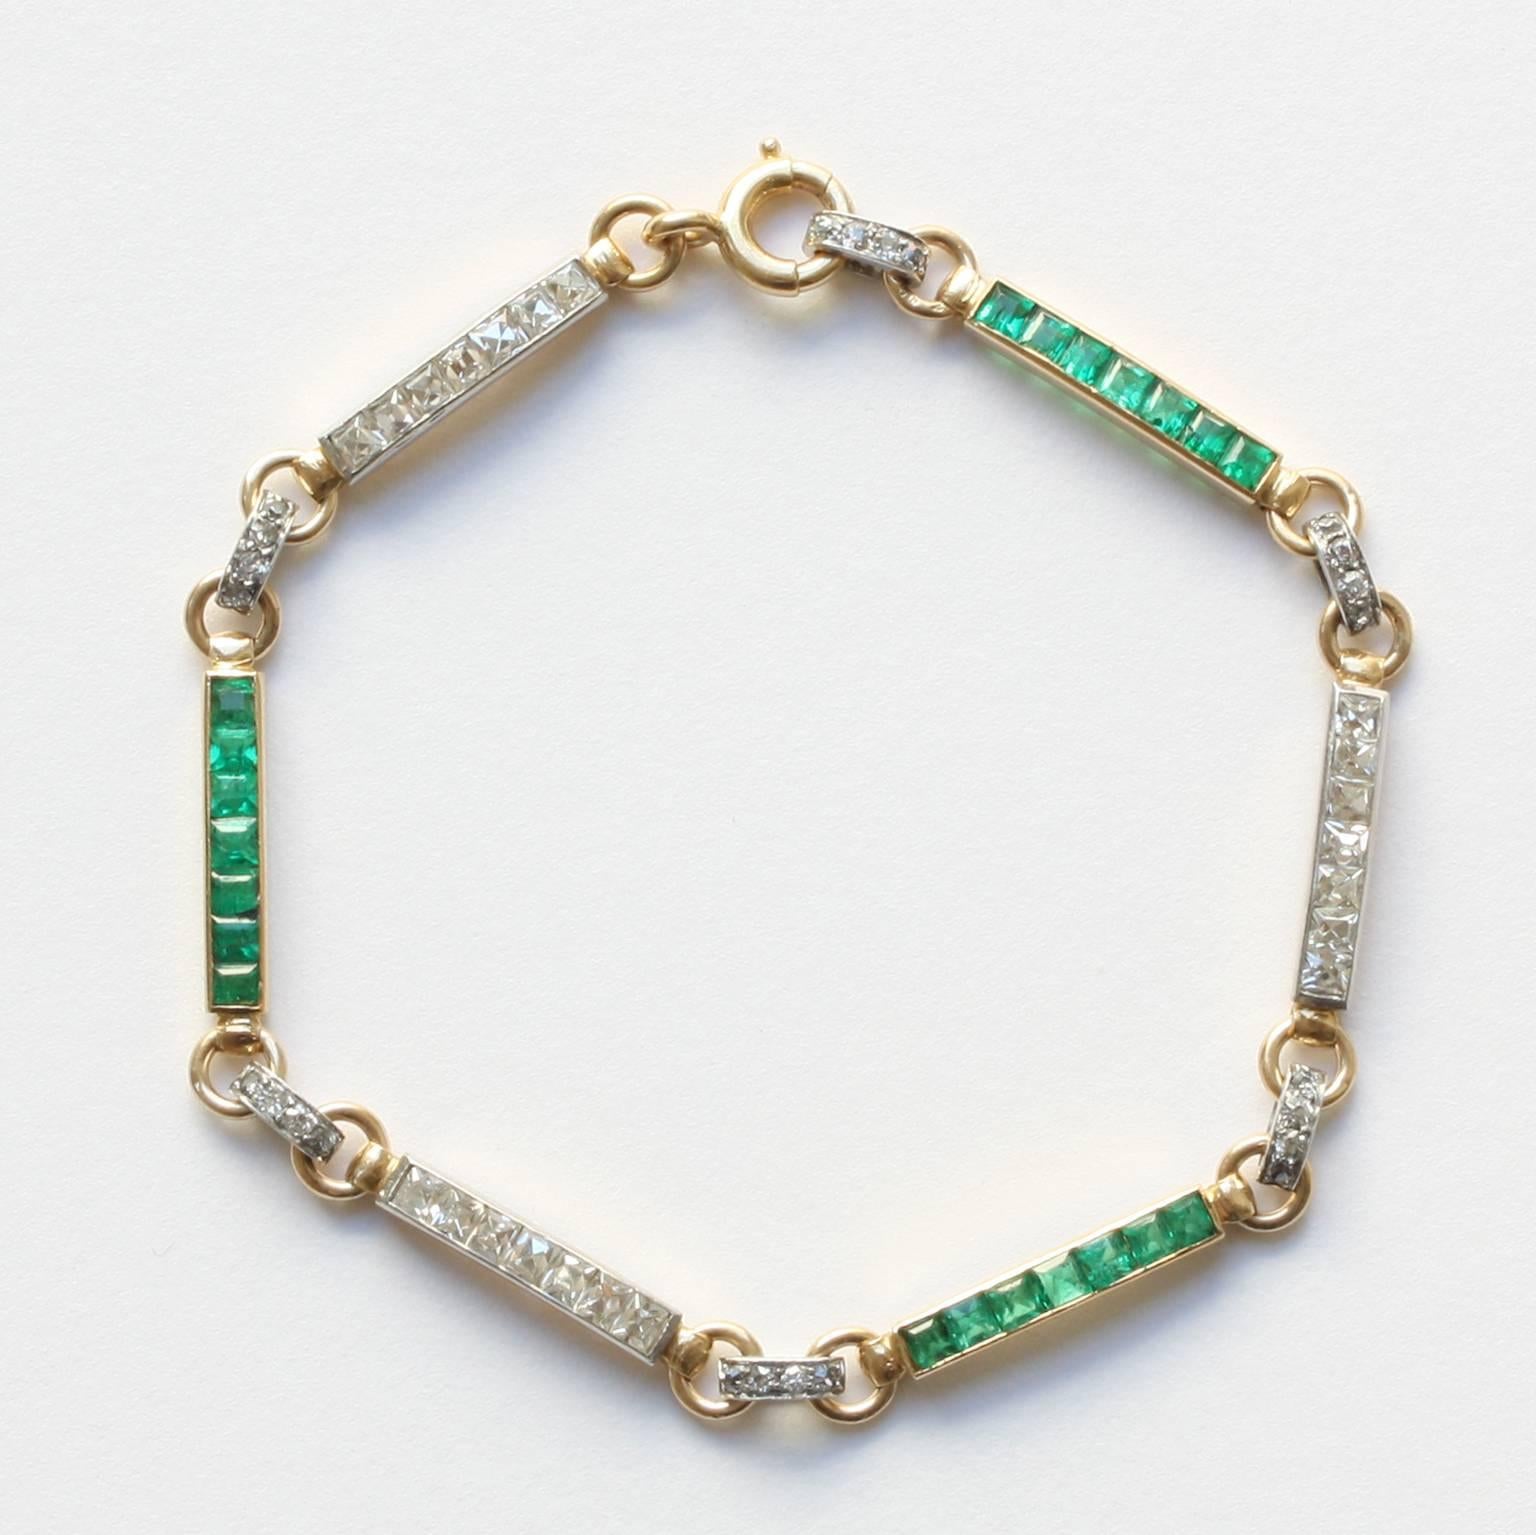 An 18 carat gold and platinum Art Deco bracelet, made out of 6 links of which 3 are set with French cut diamonds alternated with 3 links that are set with square cut emeralds, the links are divided by gold rings with a small platinum band set with